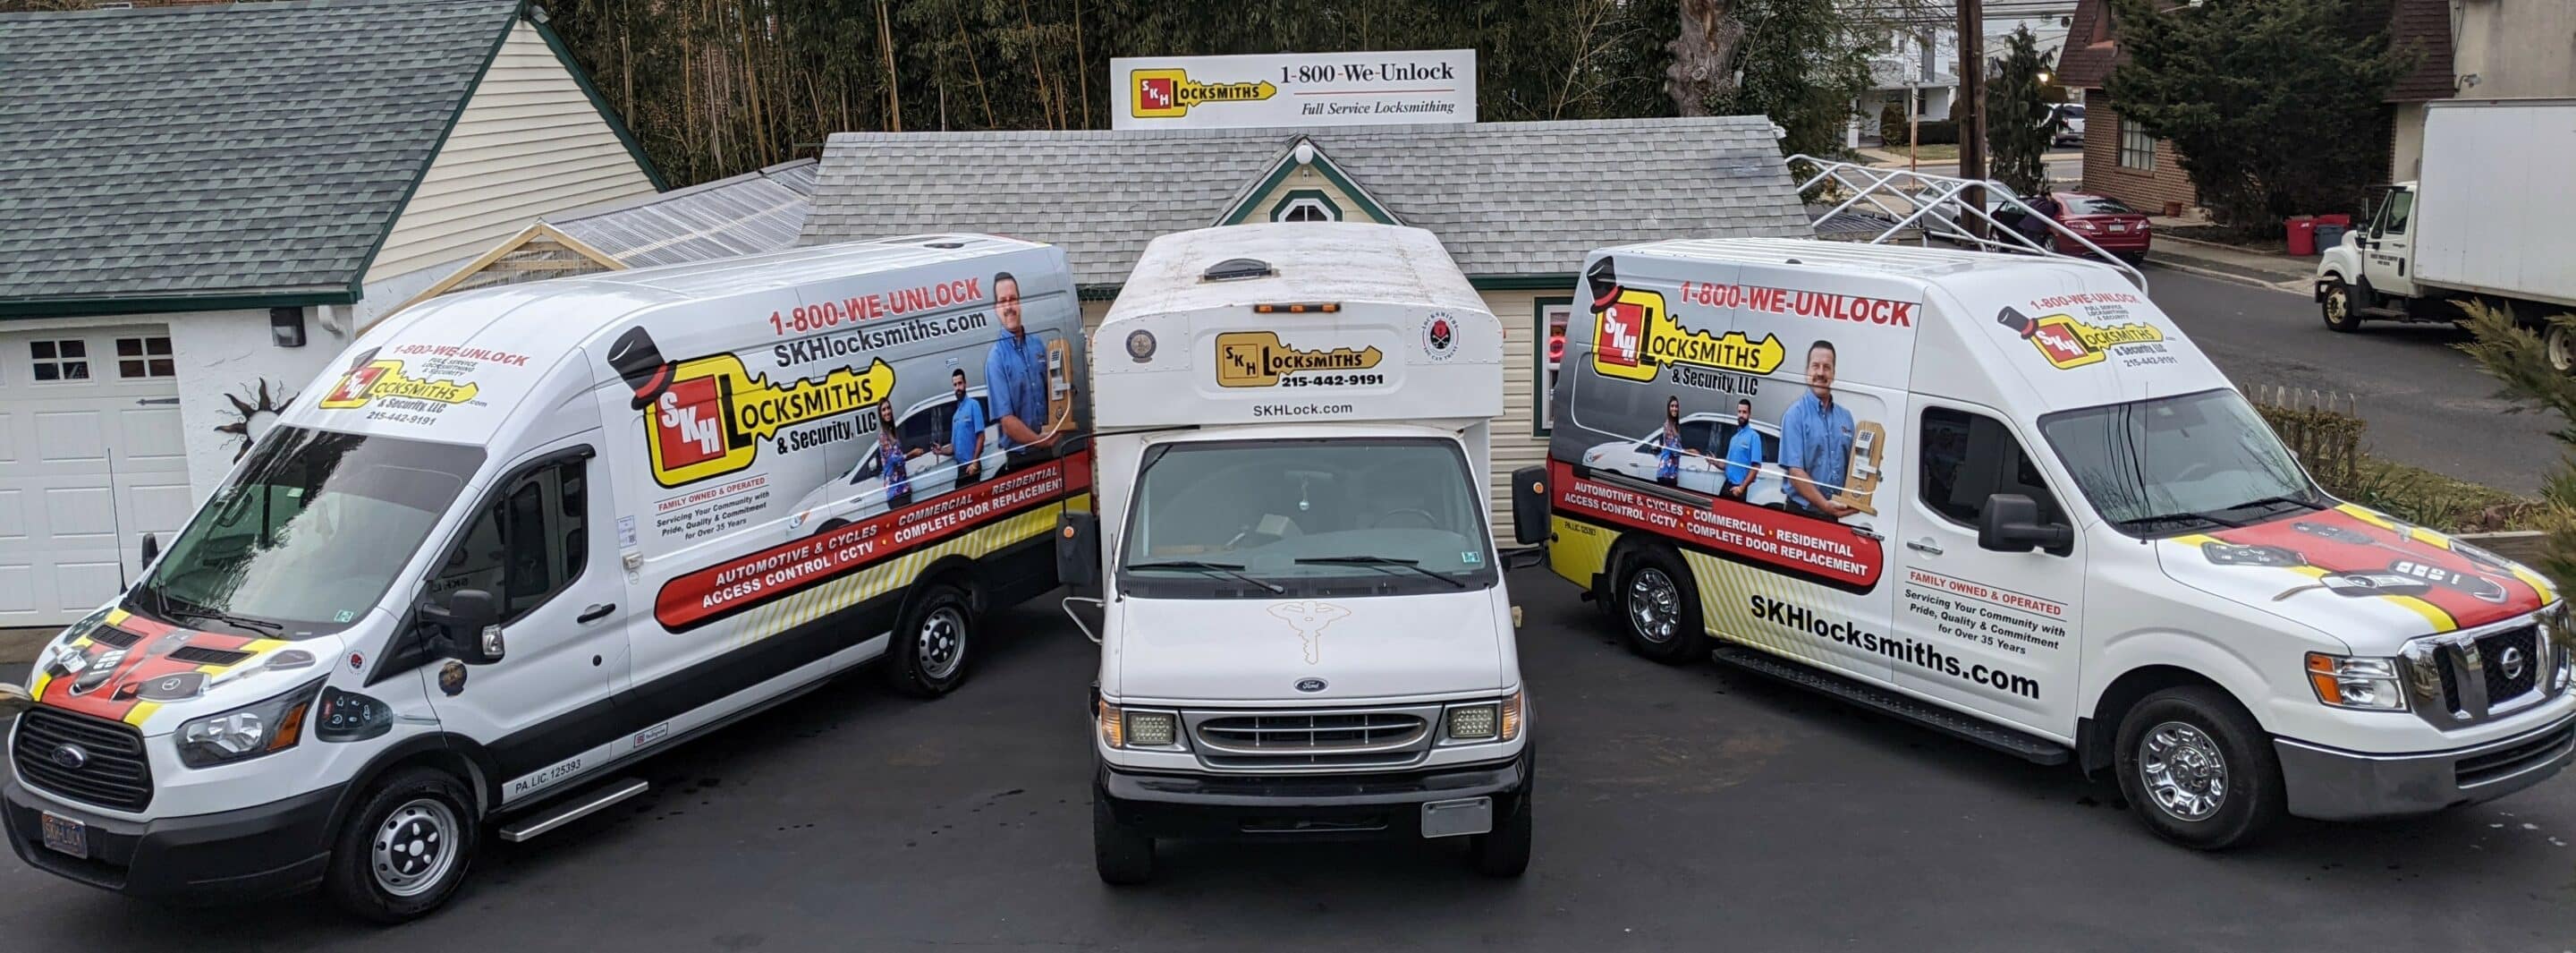 SKH Locksmiths & Security 469 Lincoln Ave Hatboro PA office